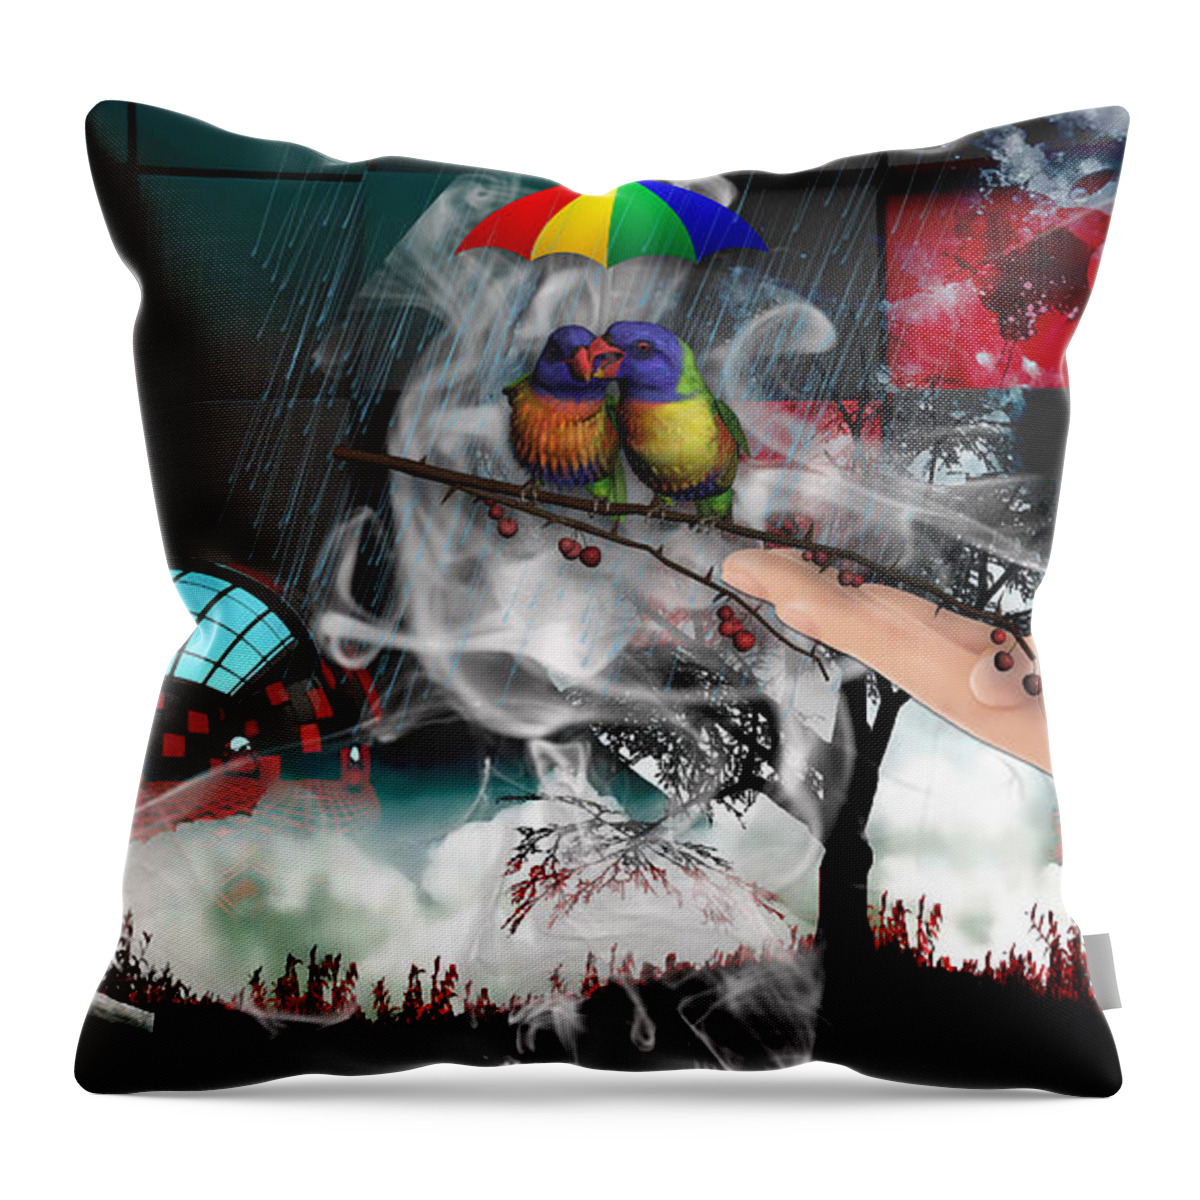 Fantasy Throw Pillow featuring the mixed media Edge Of Desire by Marvin Blaine